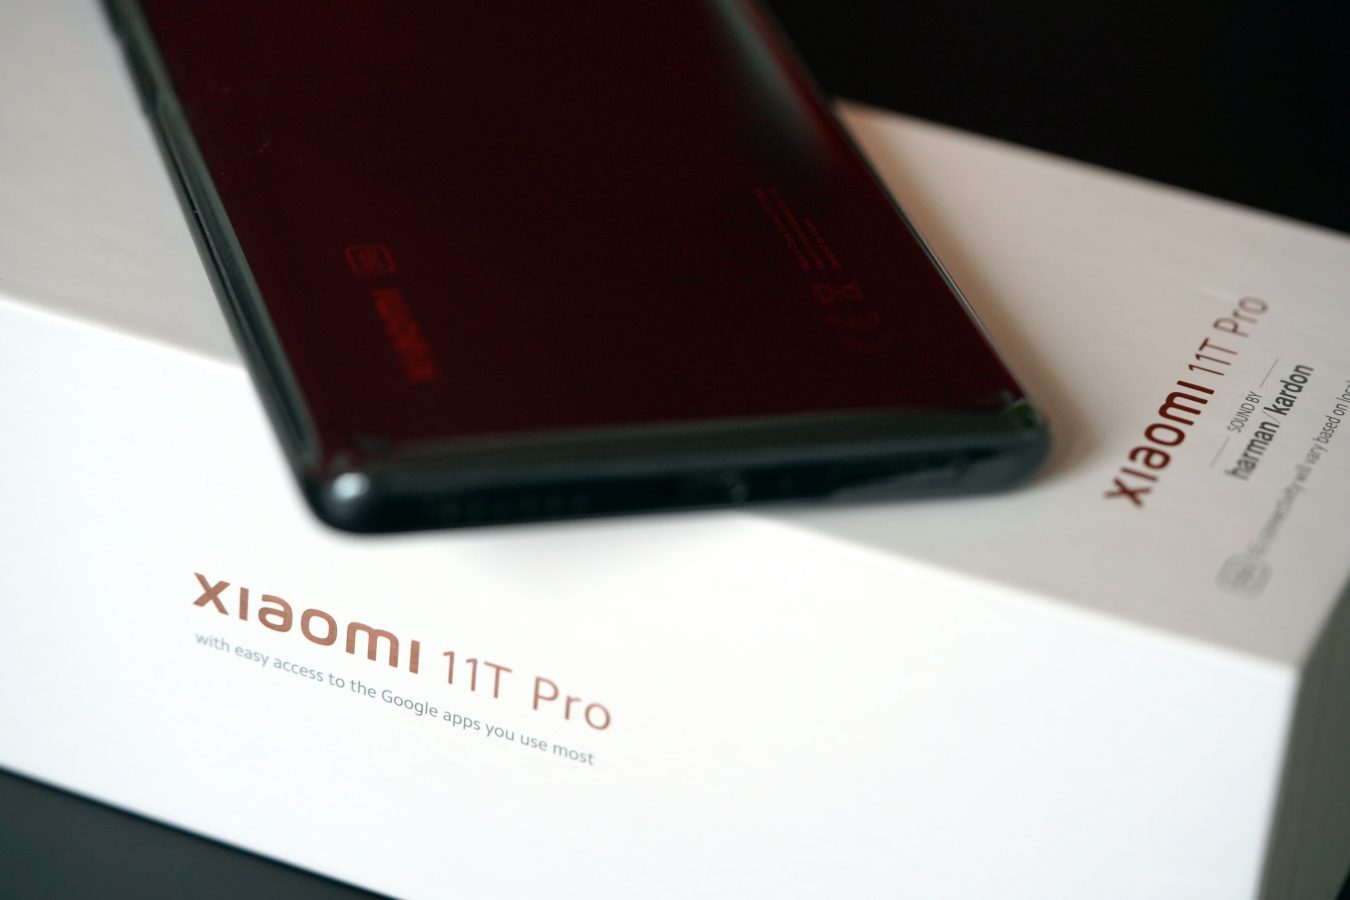 Xiaomi Spriong Festival model 11T Pro